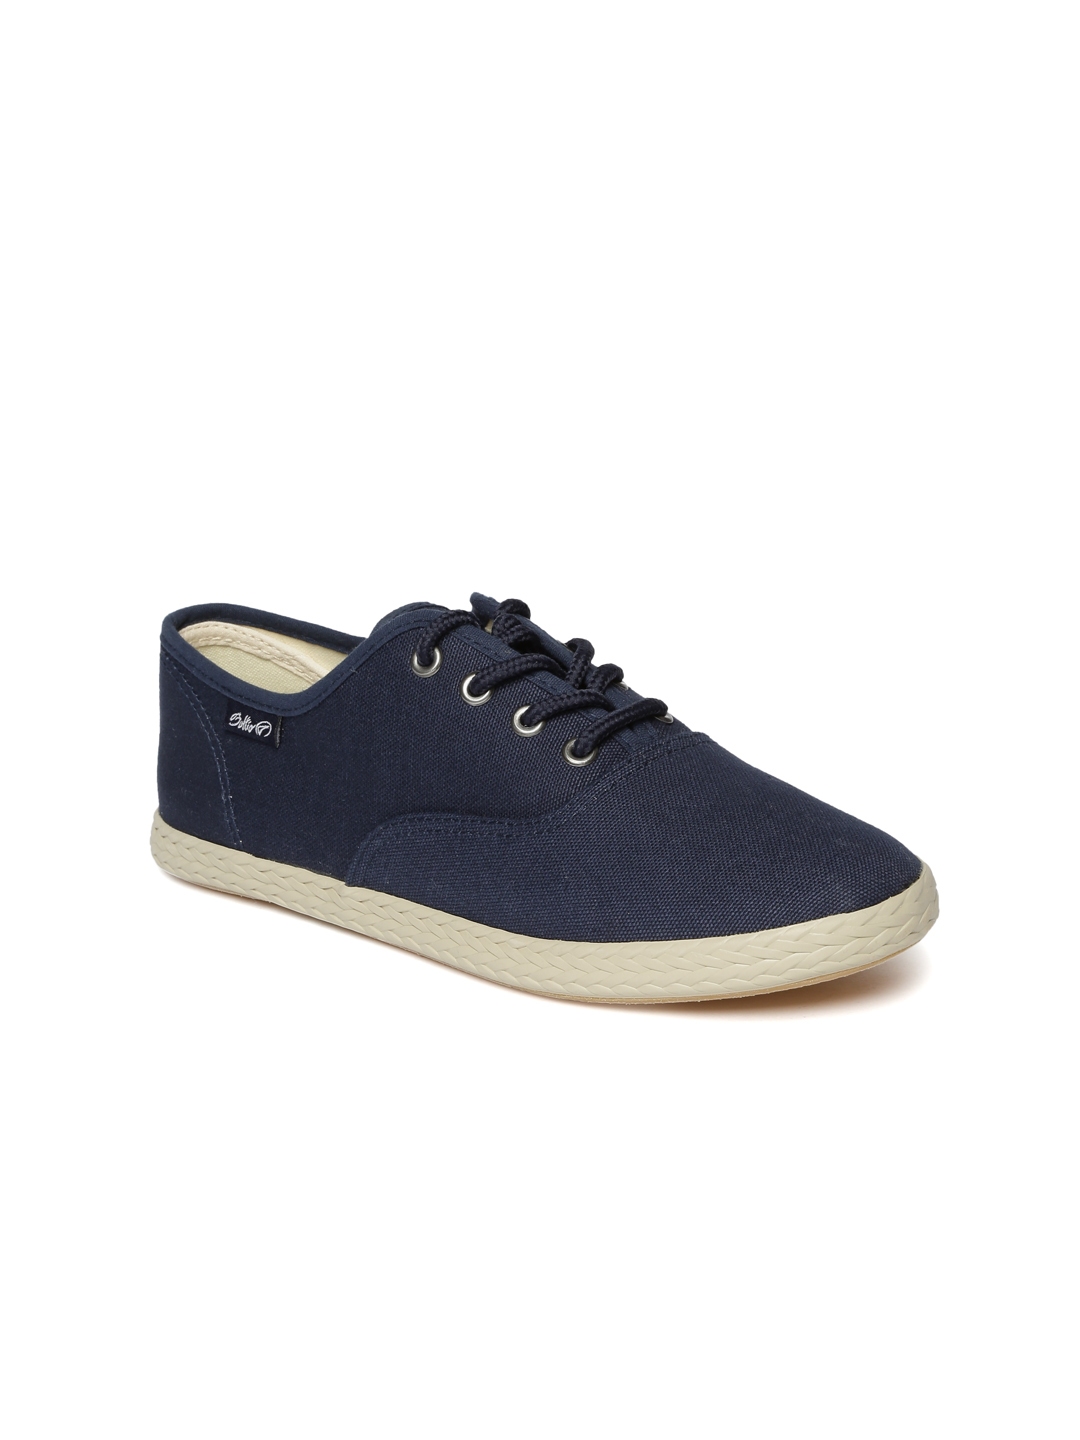 Buy Boltio Women Navy Sneakers - Casual Shoes for Women 1510345 | Myntra